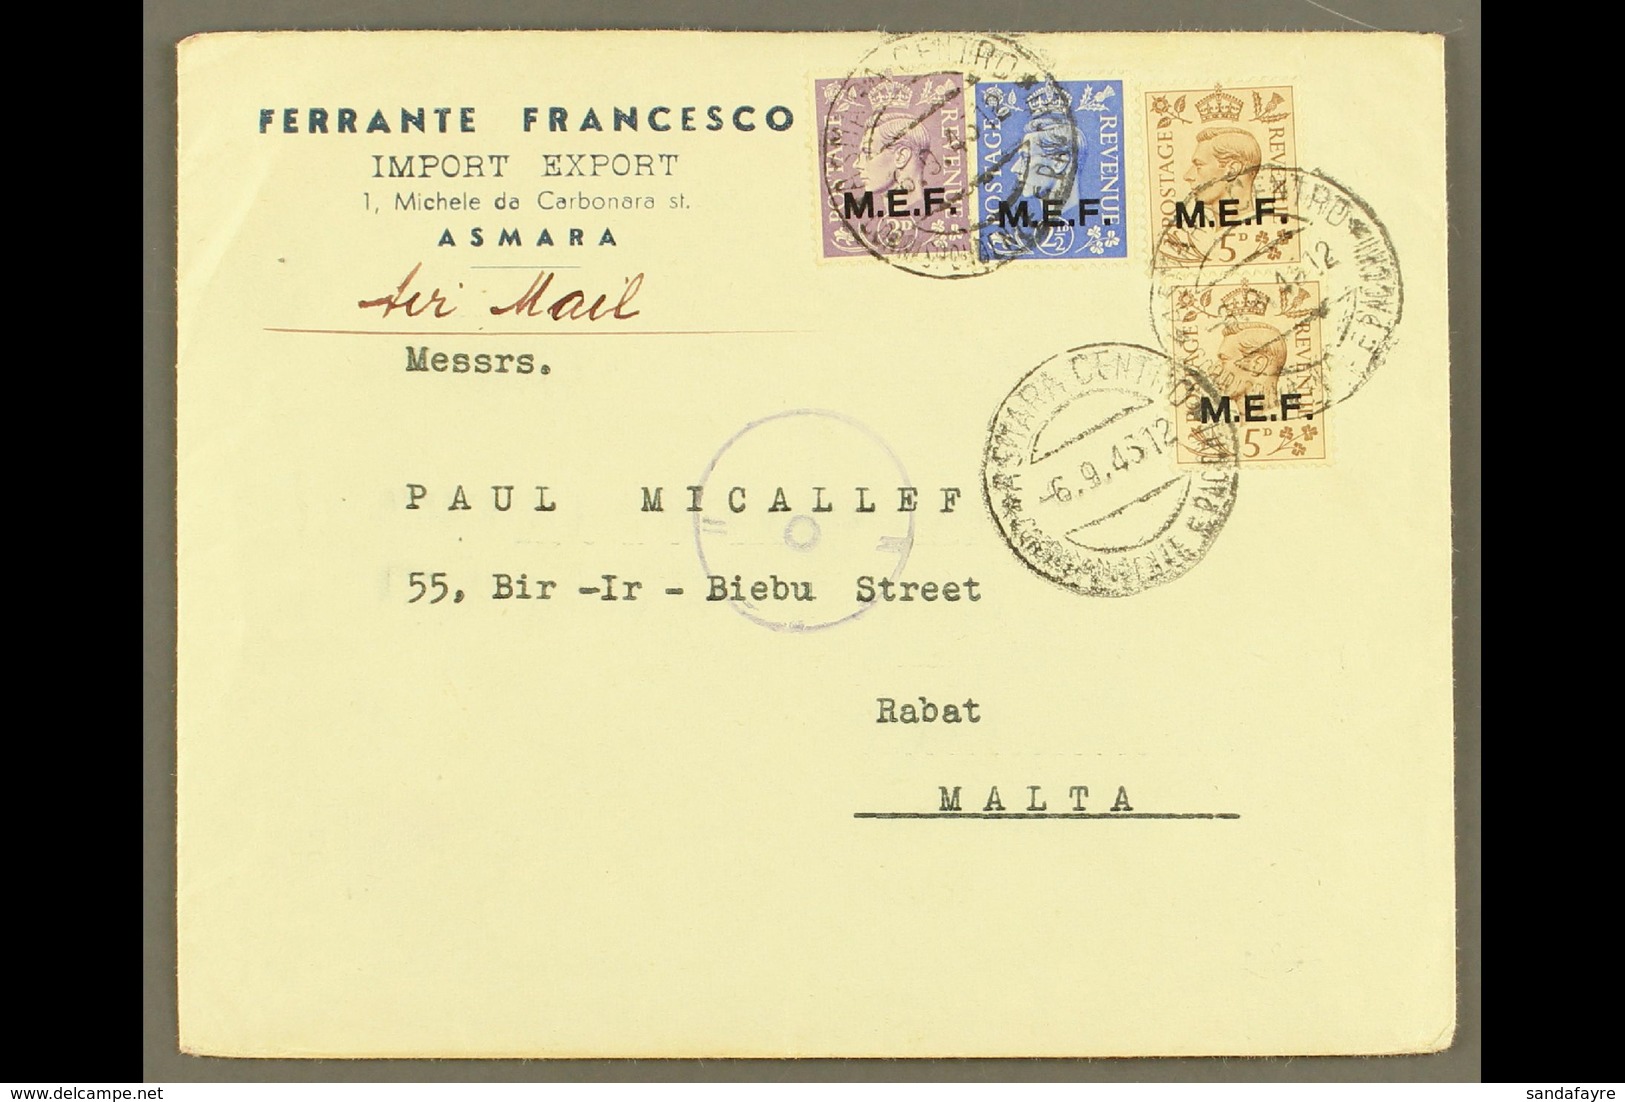 ERITREA 1945 Commercial Cover To Malta, Franked With 2½d, 3d & 5d Pair Of KGVI "M.E.F." Overprints, SG M13/15, Asmara 6. - Italiaans Oost-Afrika